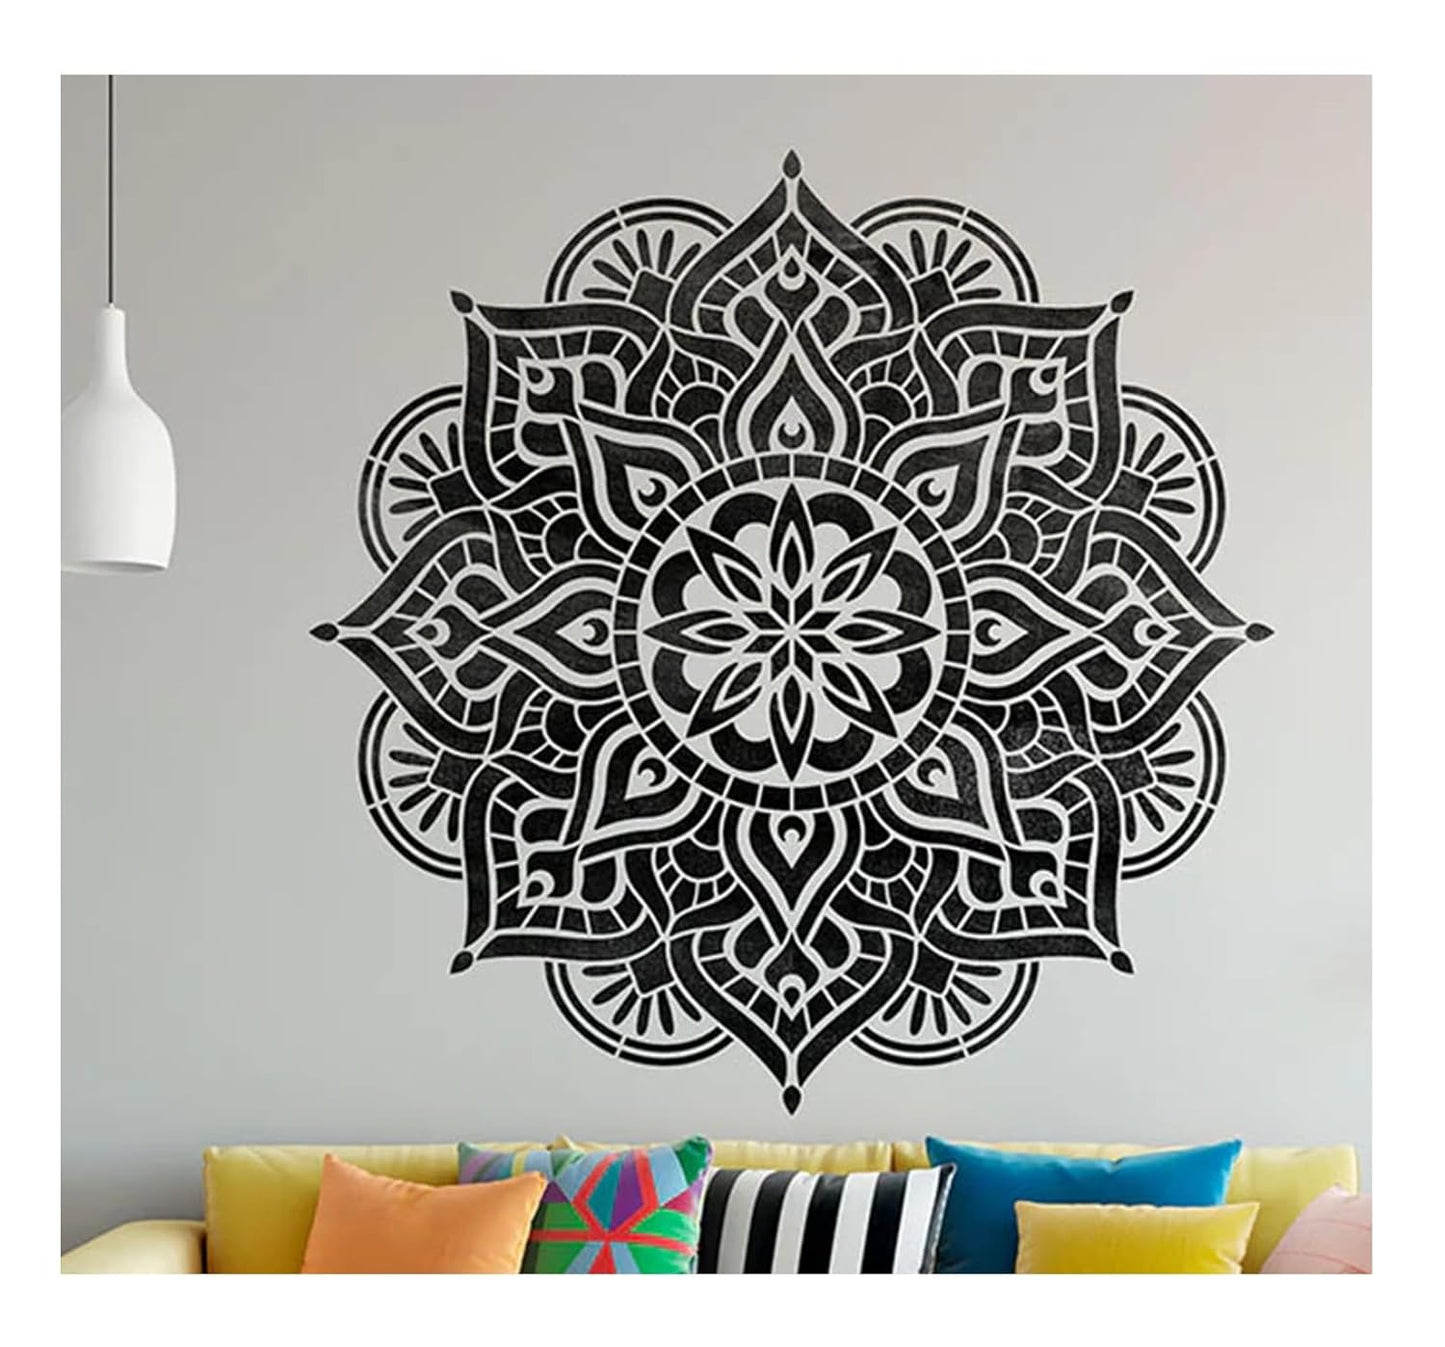 Latest Pranayam Full Mandala Stencils for Wall Painting - Pack of 1, Sheet Size 24 x 24 inch/Design for Wall Painting 22 x 22 inch - Large